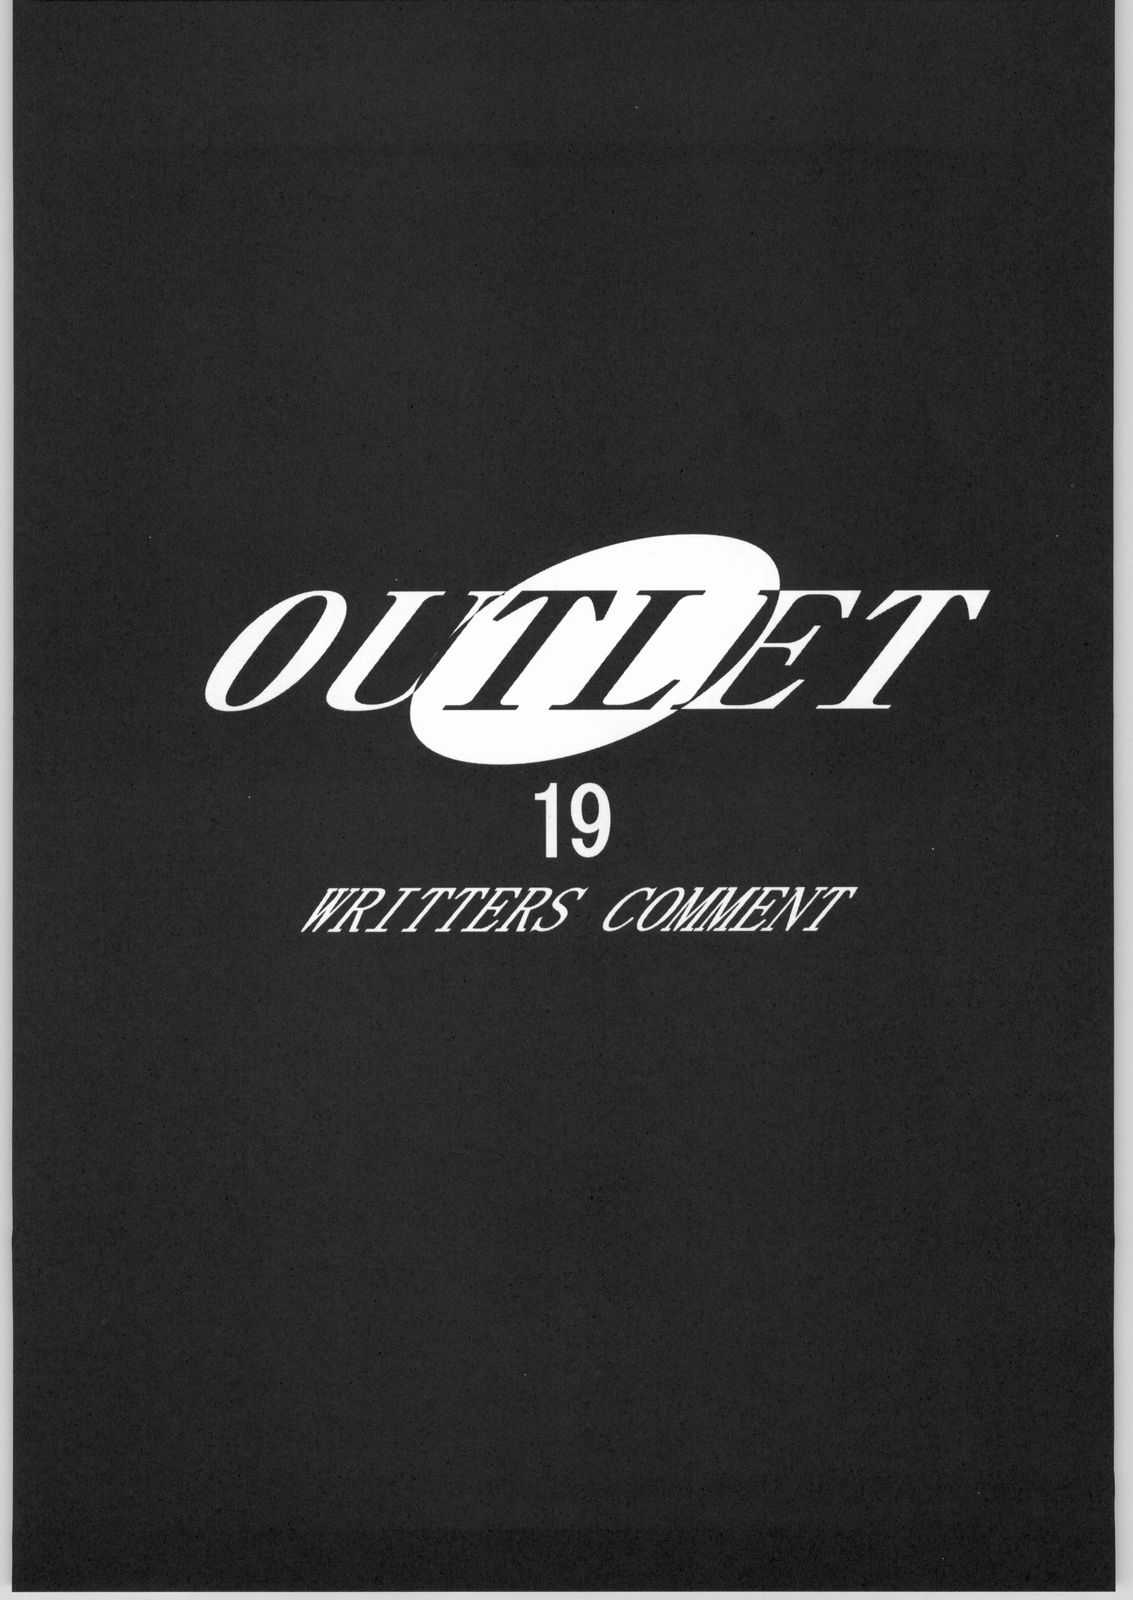 [ST DIFFERENT] Outlet 19 (Dead or Alive) [ST DIFFERENT] Outlet 19 (デッド・オア・アライヴ	)